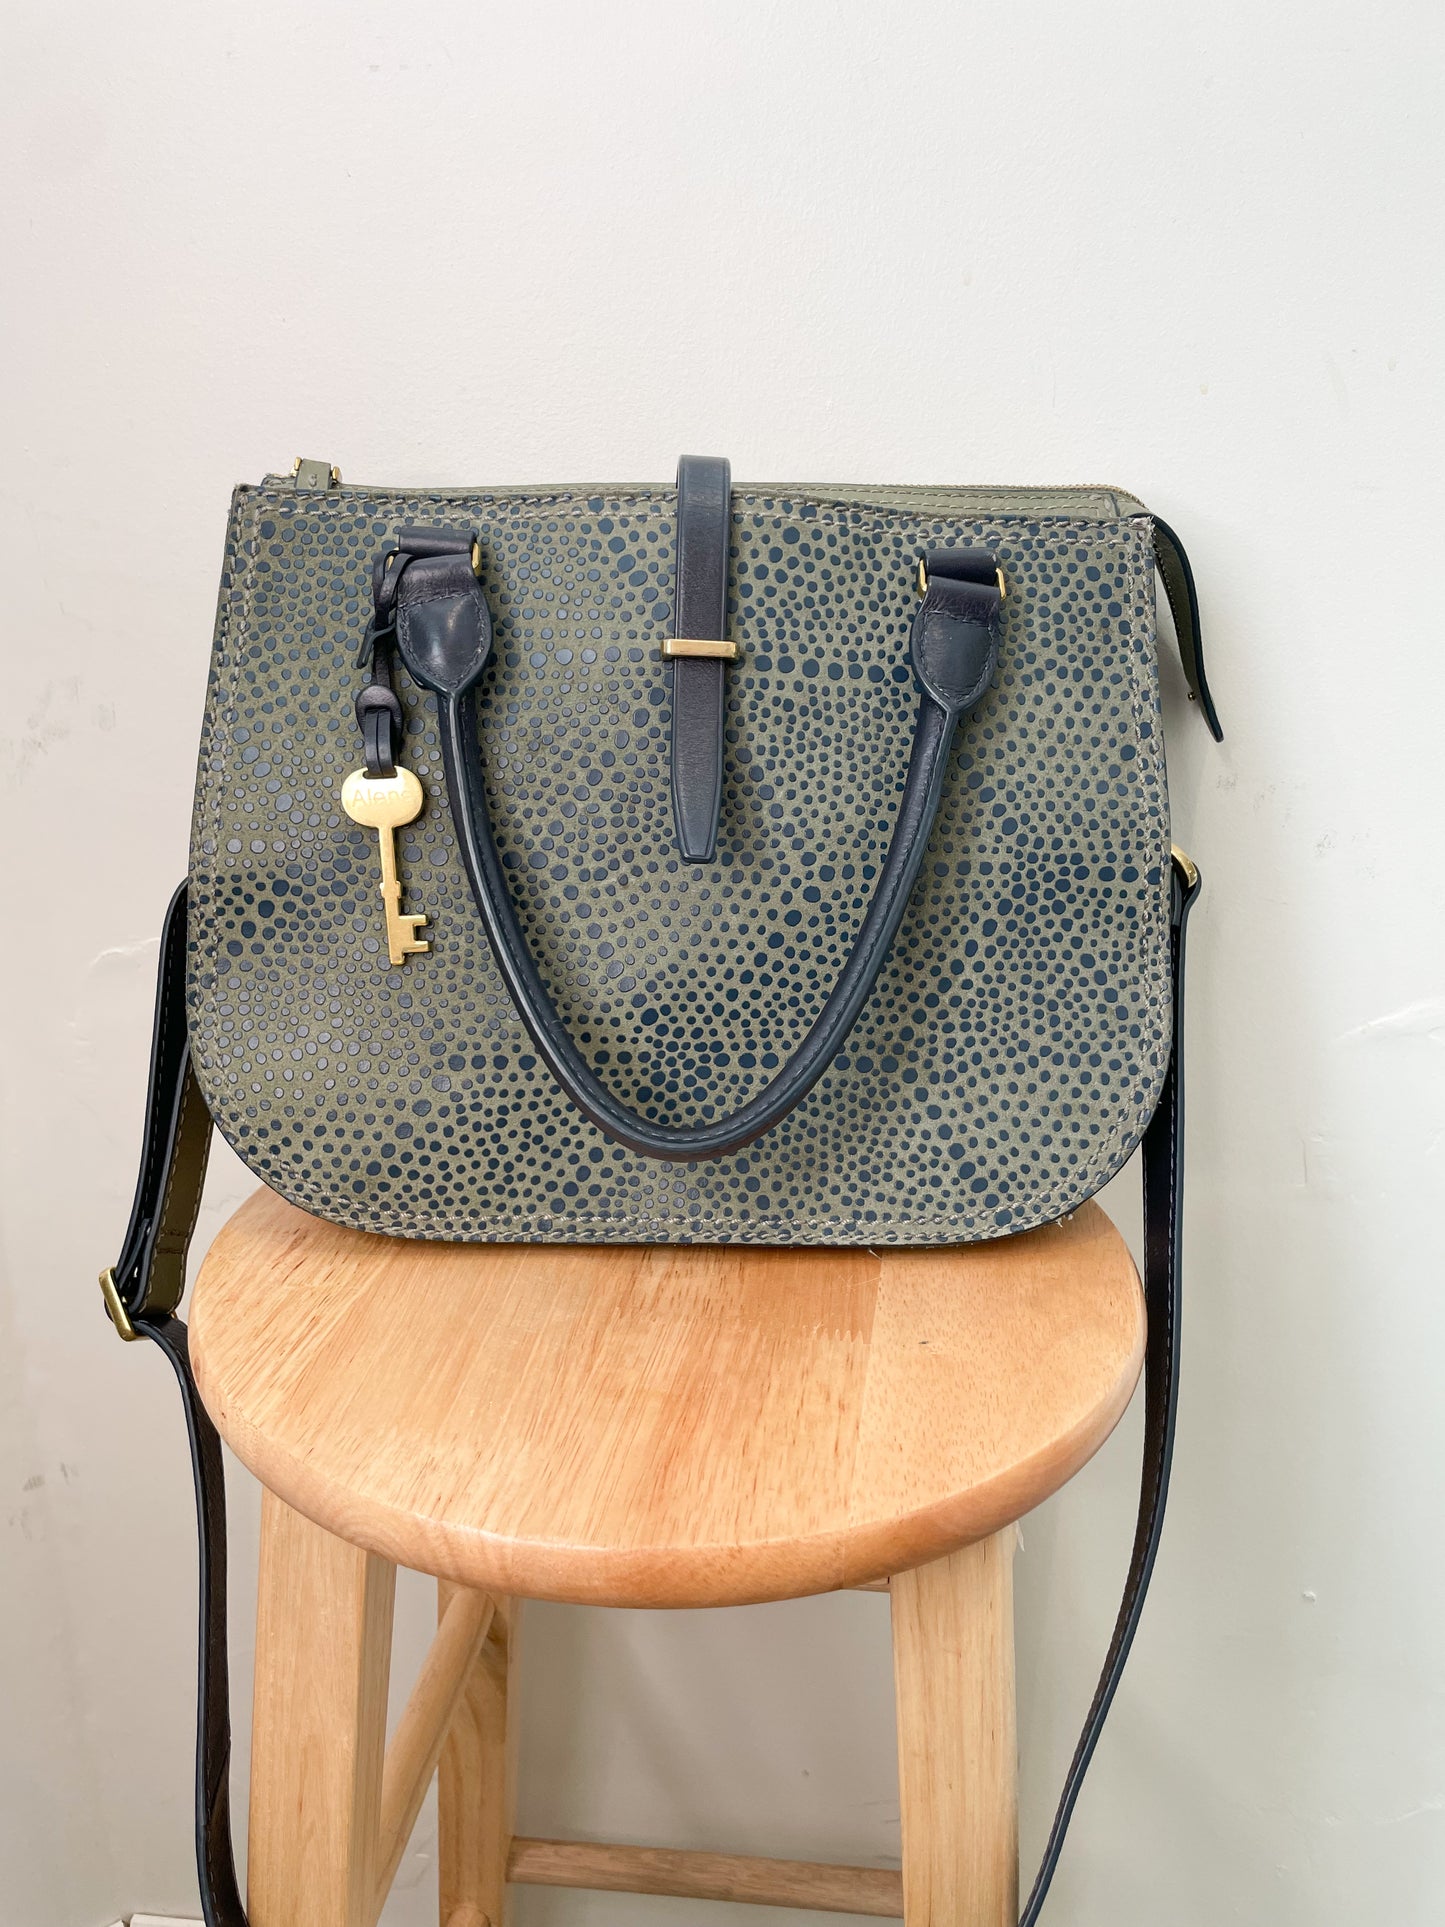 Fossil Olive Navy Dotted Genuine Leather 2-in-1 Satchel Cross Body Bag